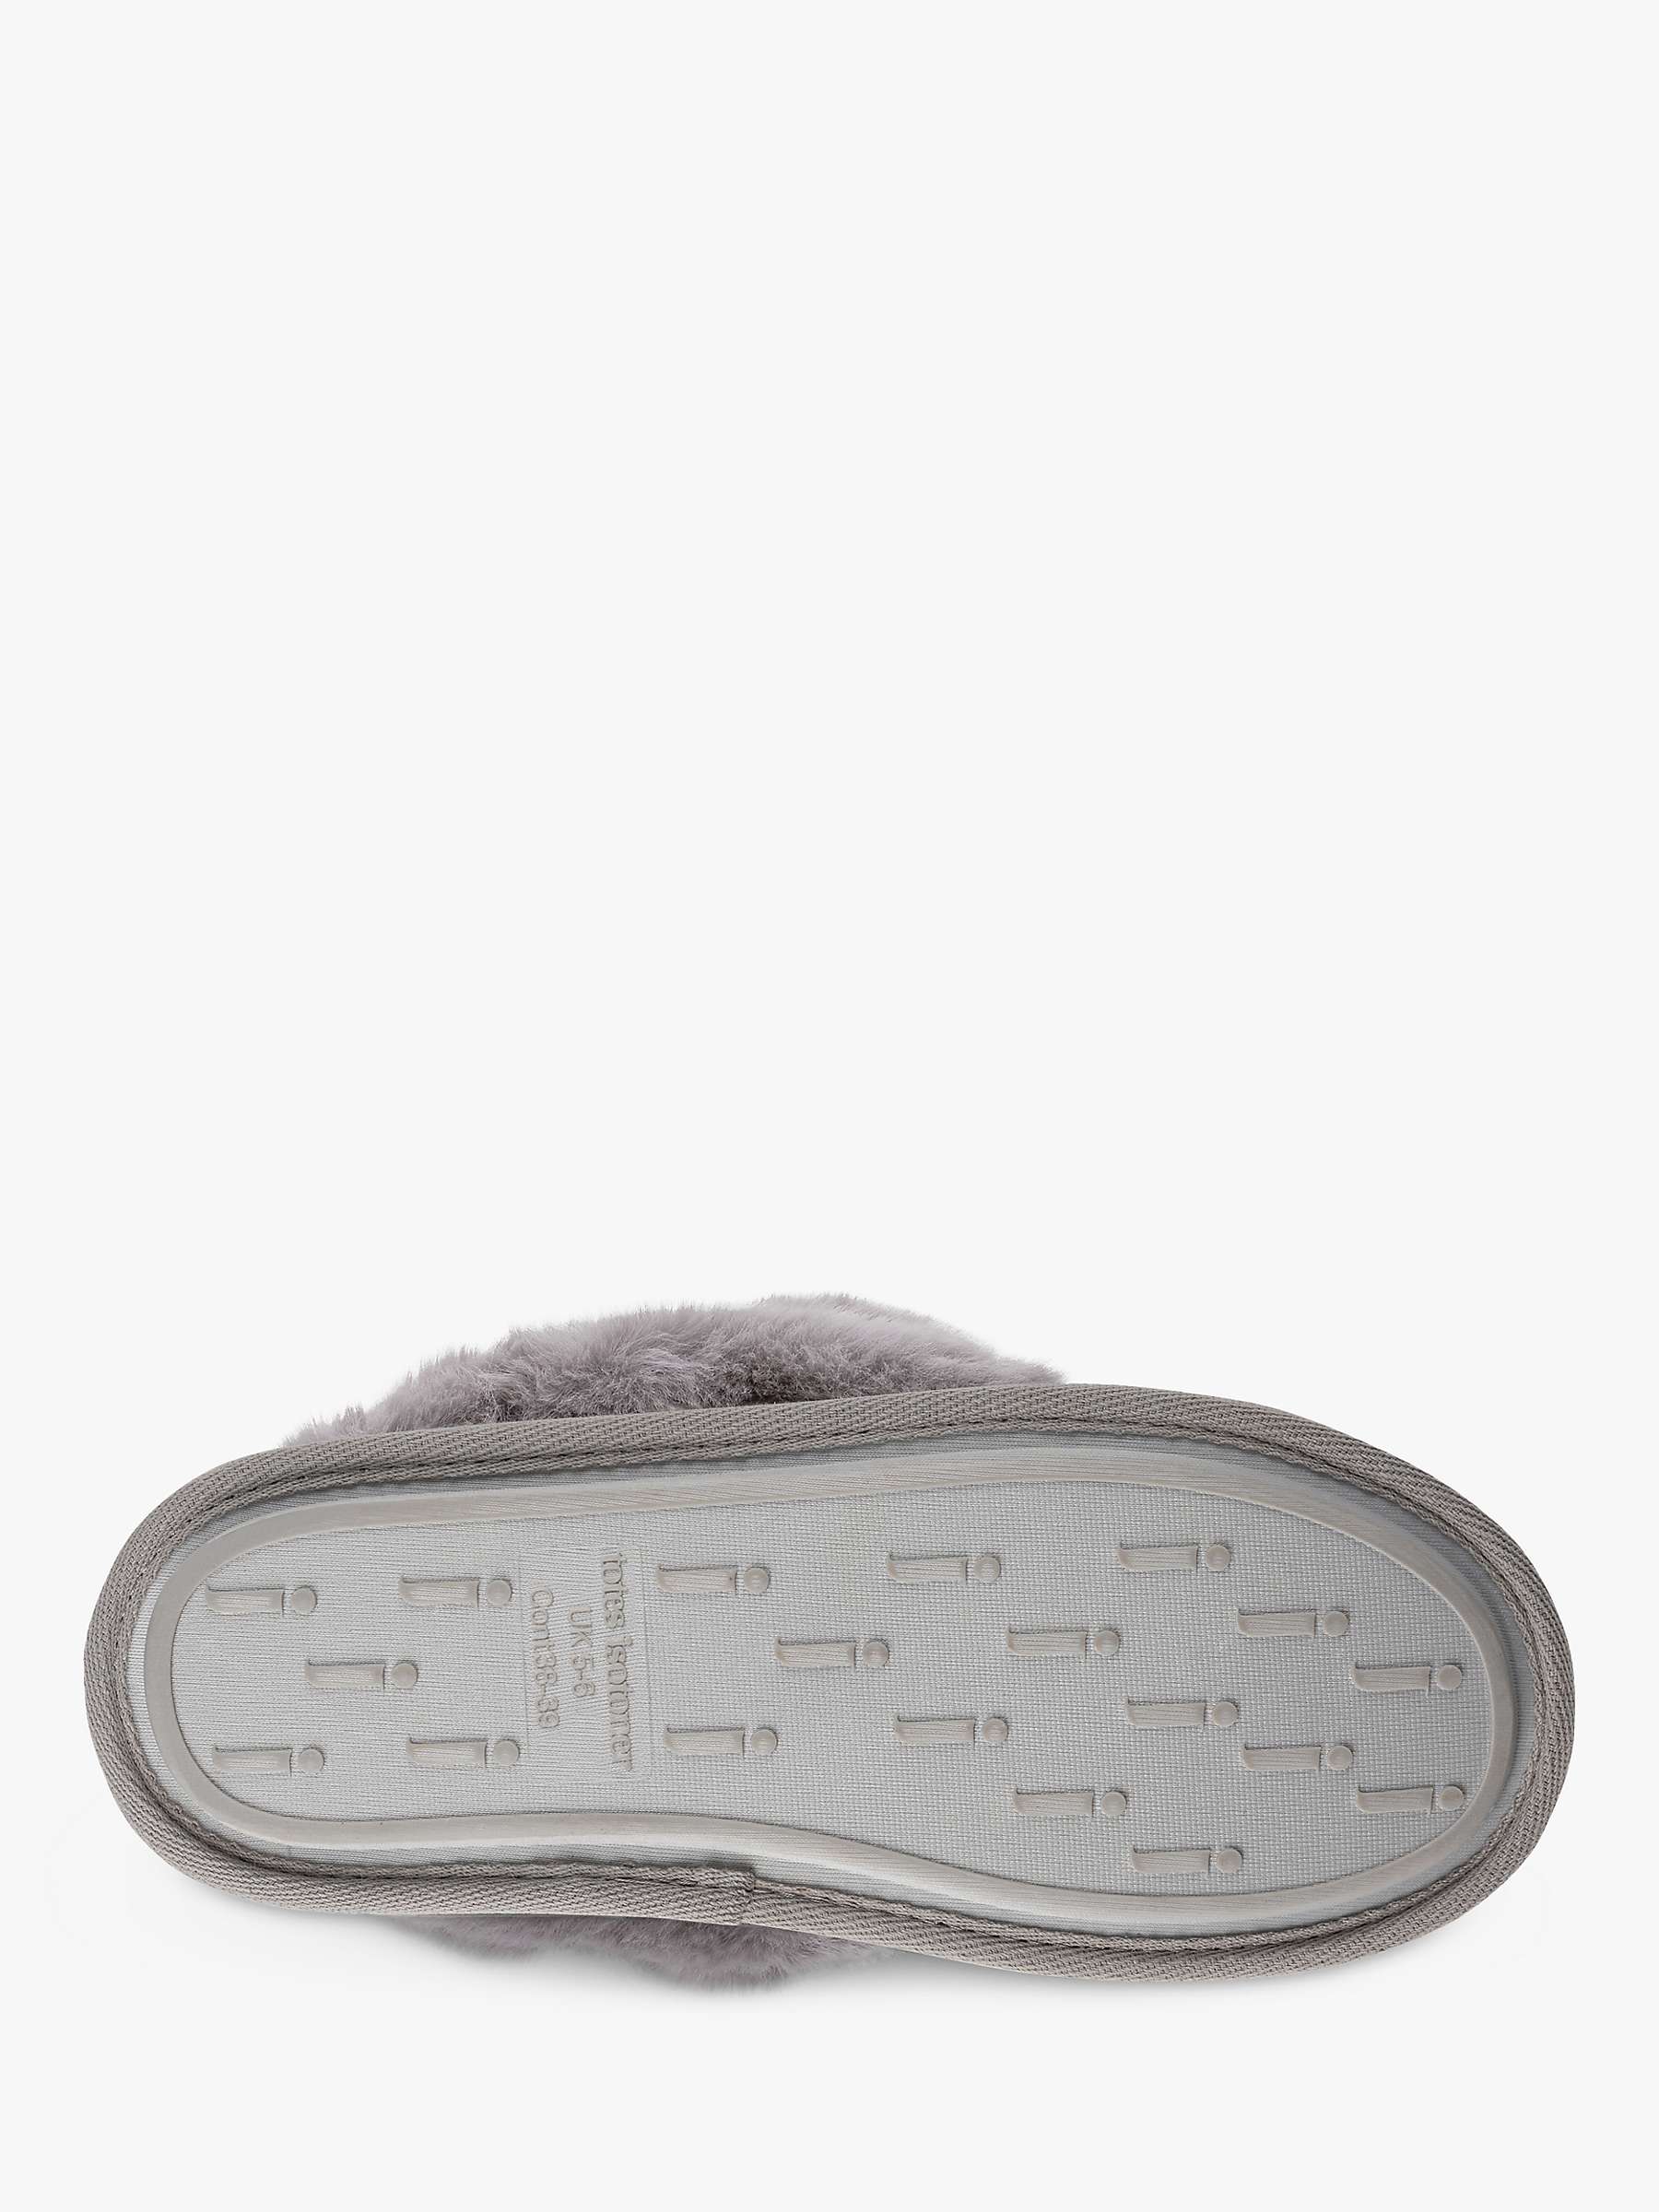 Buy totes Real Suede Moccasin Bootie Slippers Online at johnlewis.com